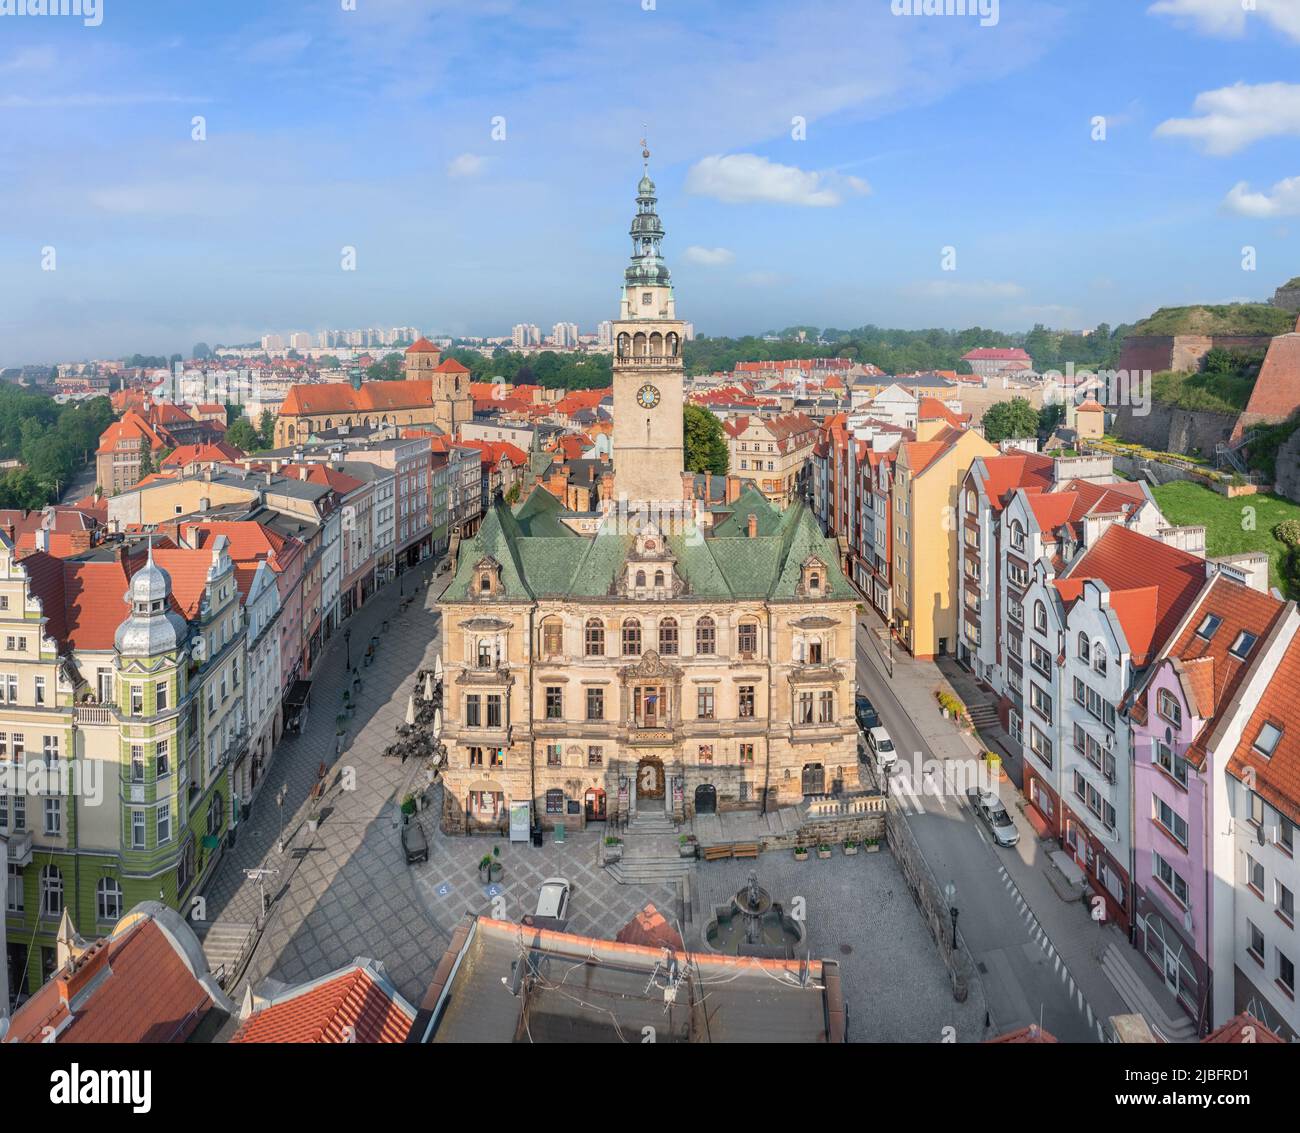 Klodzko, Poland. Aerial view of historic Town Hall located on Market square Stock Photo